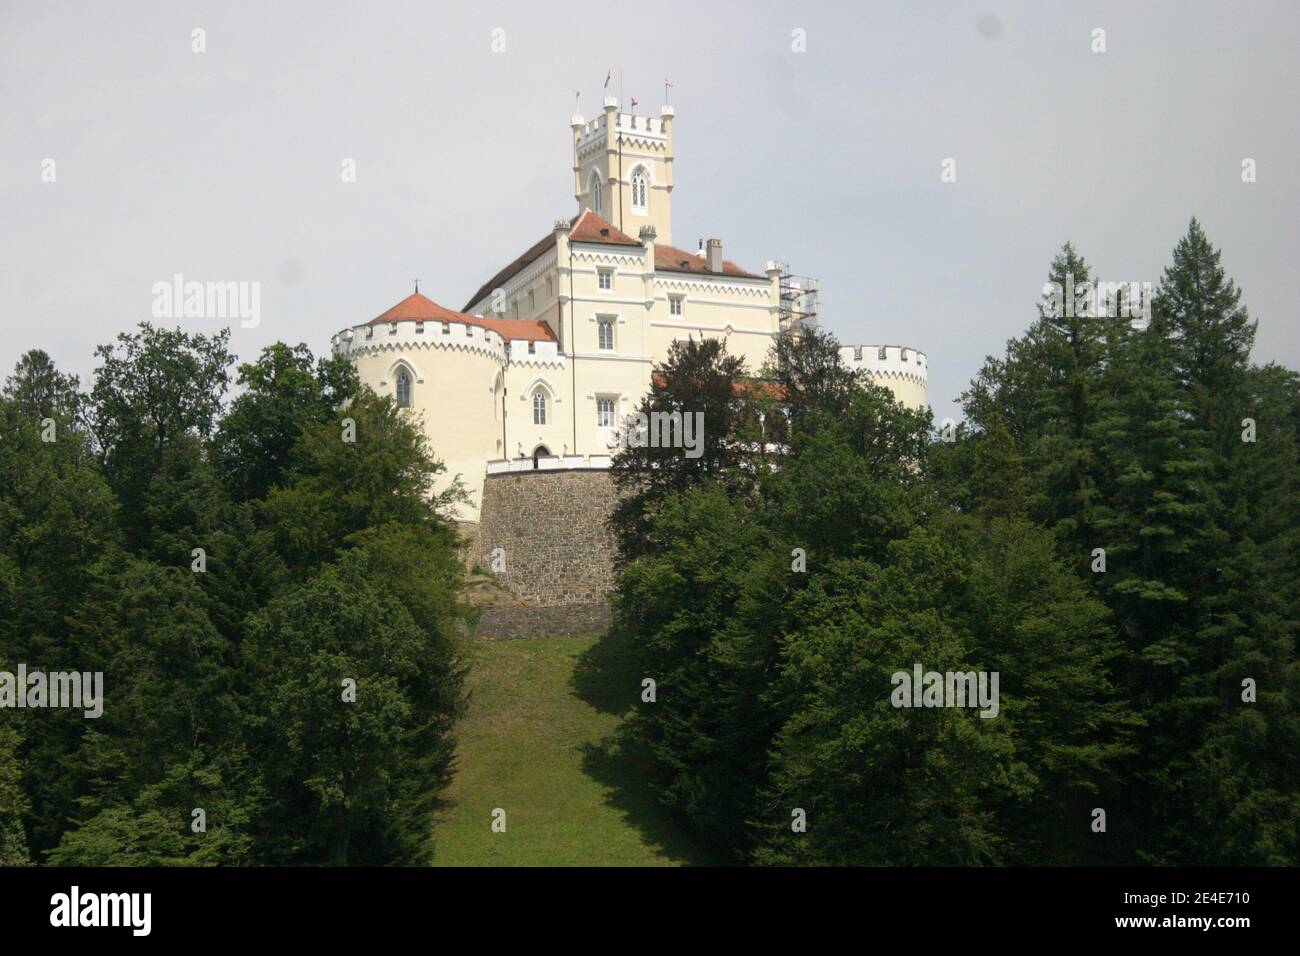 A medieval battlement surrounded by forest, on the top of the hill, on a cloudy day in summer Stock Photo